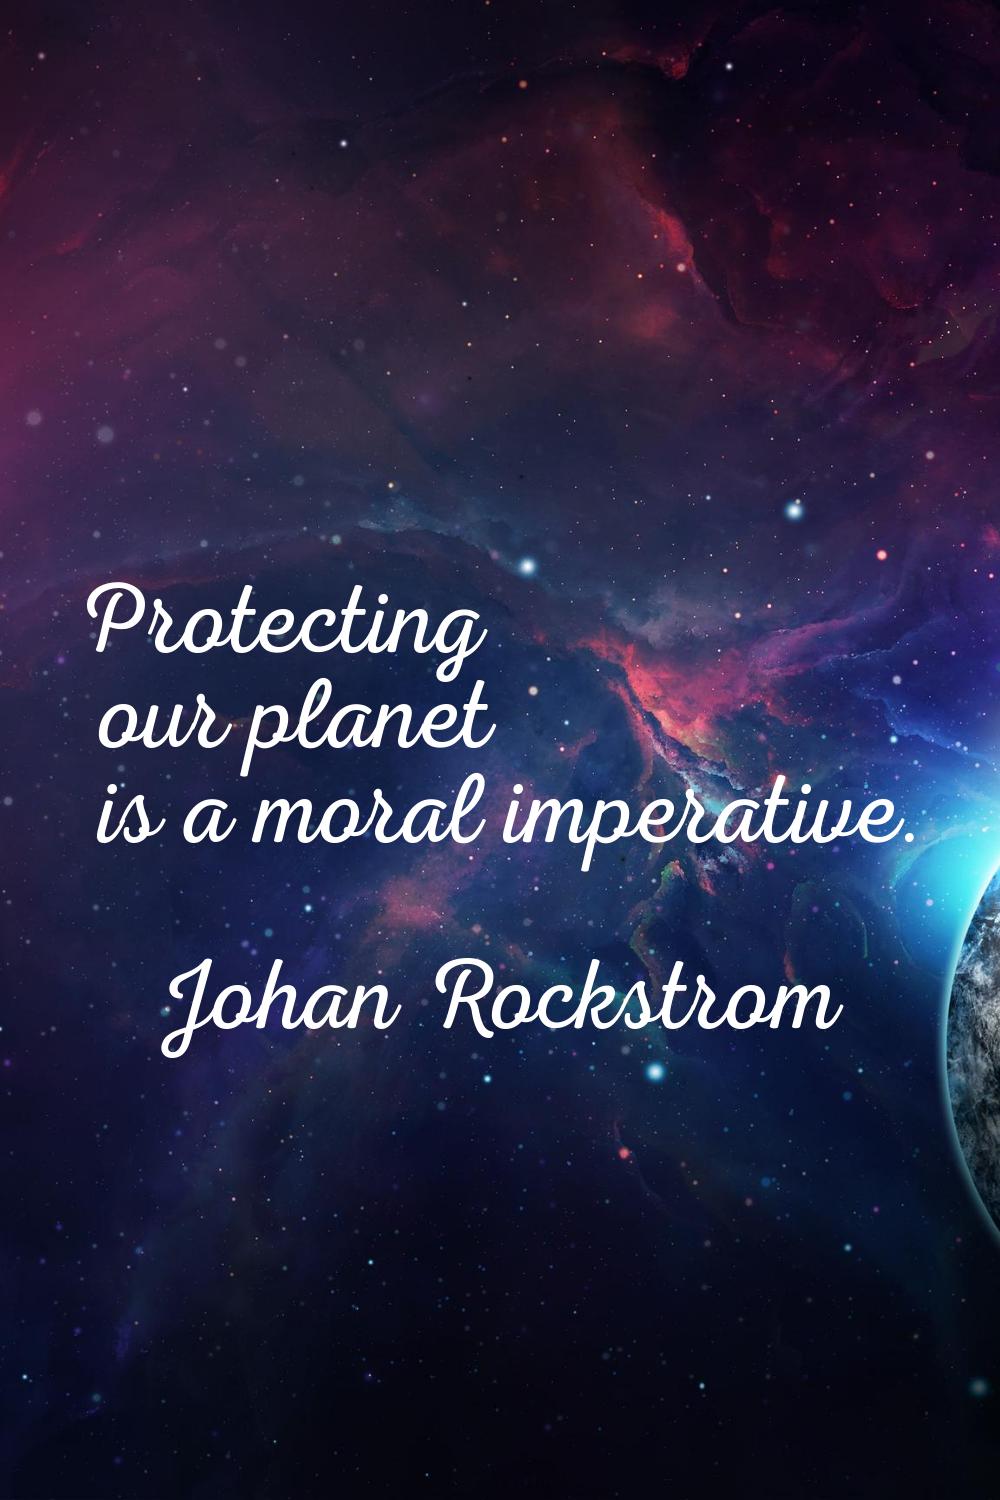 Protecting our planet is a moral imperative.